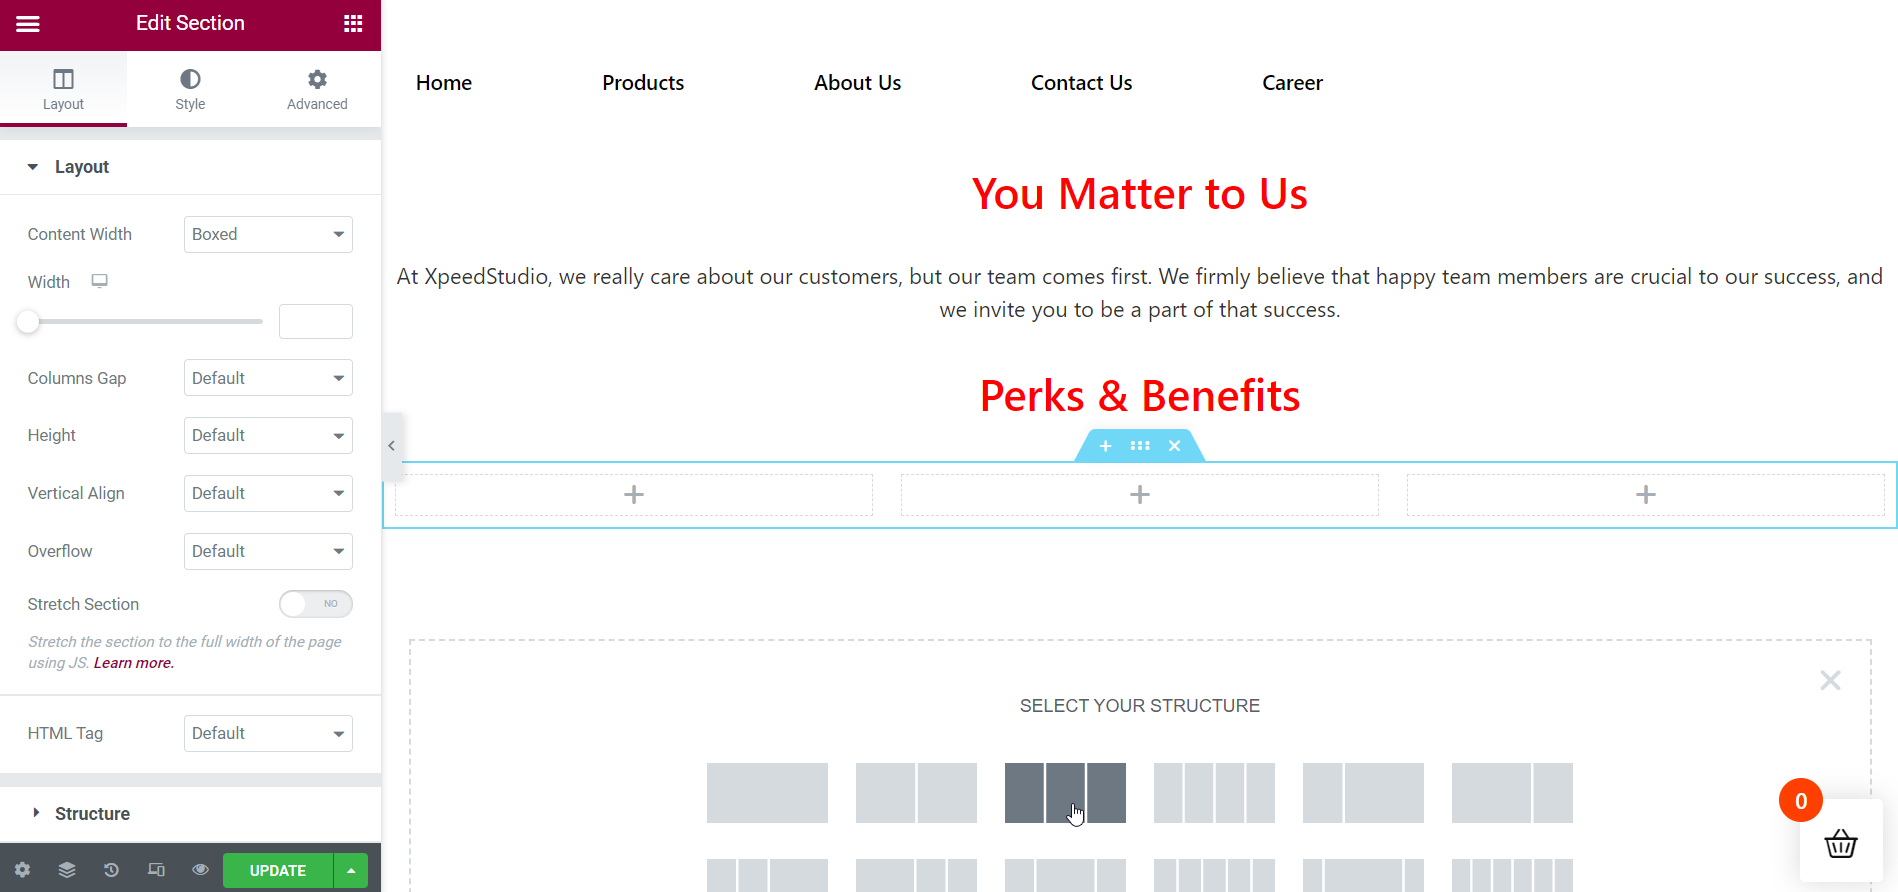 Create "Perks and Benefits" section- Create a career page